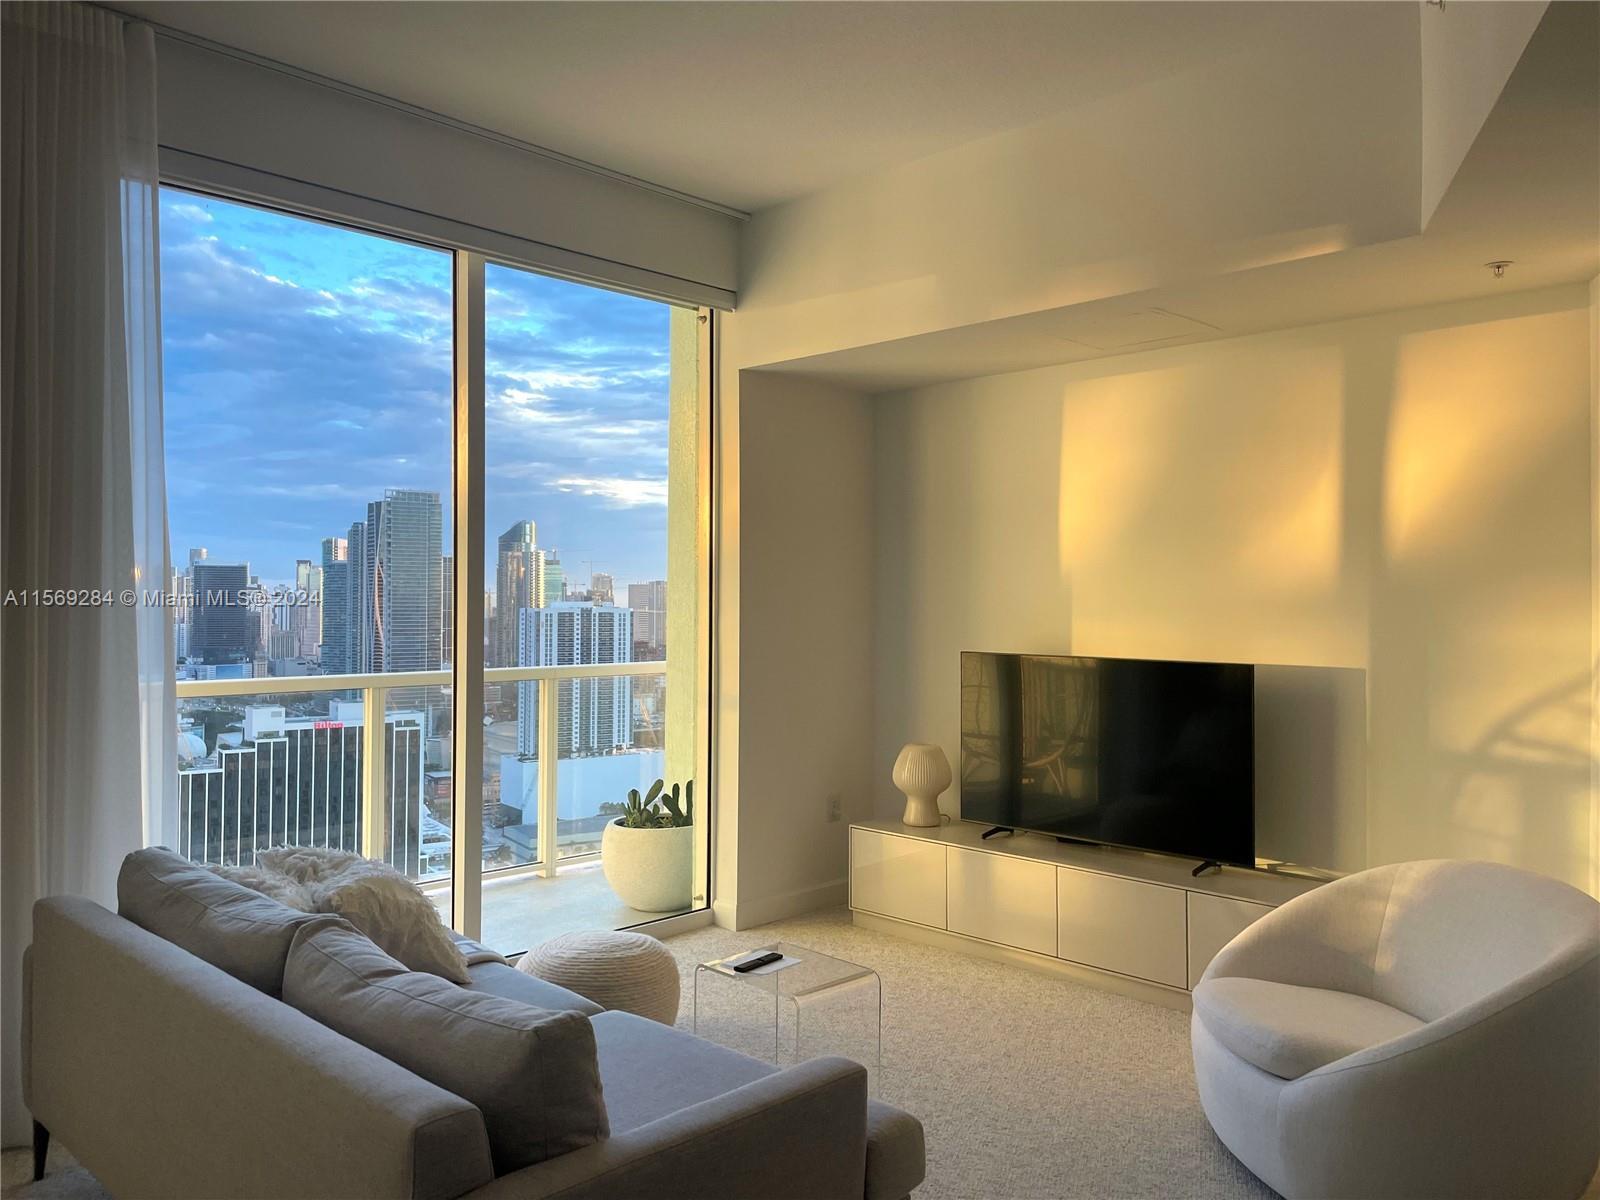 Beautiful light-filled high floor condo with amazing downtown views. Modern design, stainless steel 